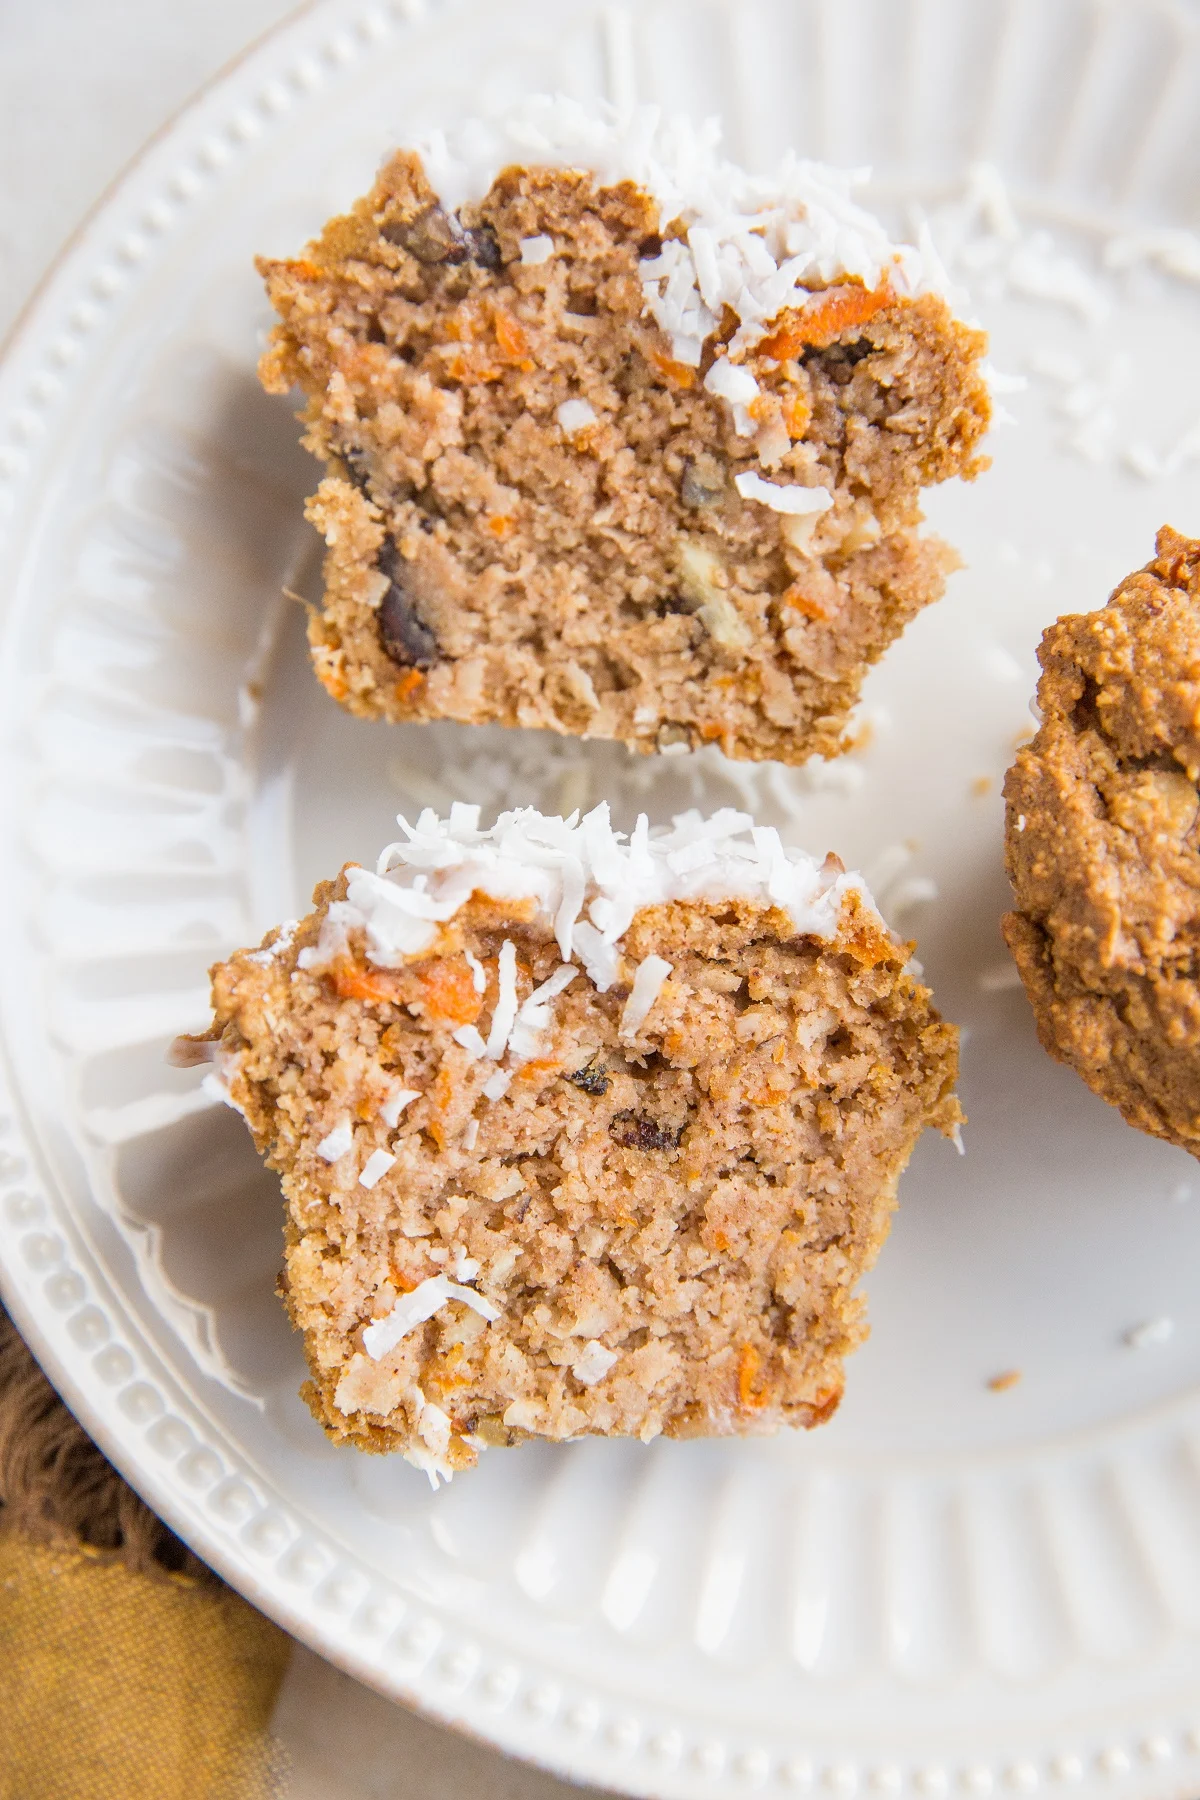 Paleo Carrot Cake Cupcakes (or carrot cake banana muffins) - naturally sweetened, grain-free, sugar-free, oil-free, healthy cupcake recipe that is gluten-free and sweetened with banana